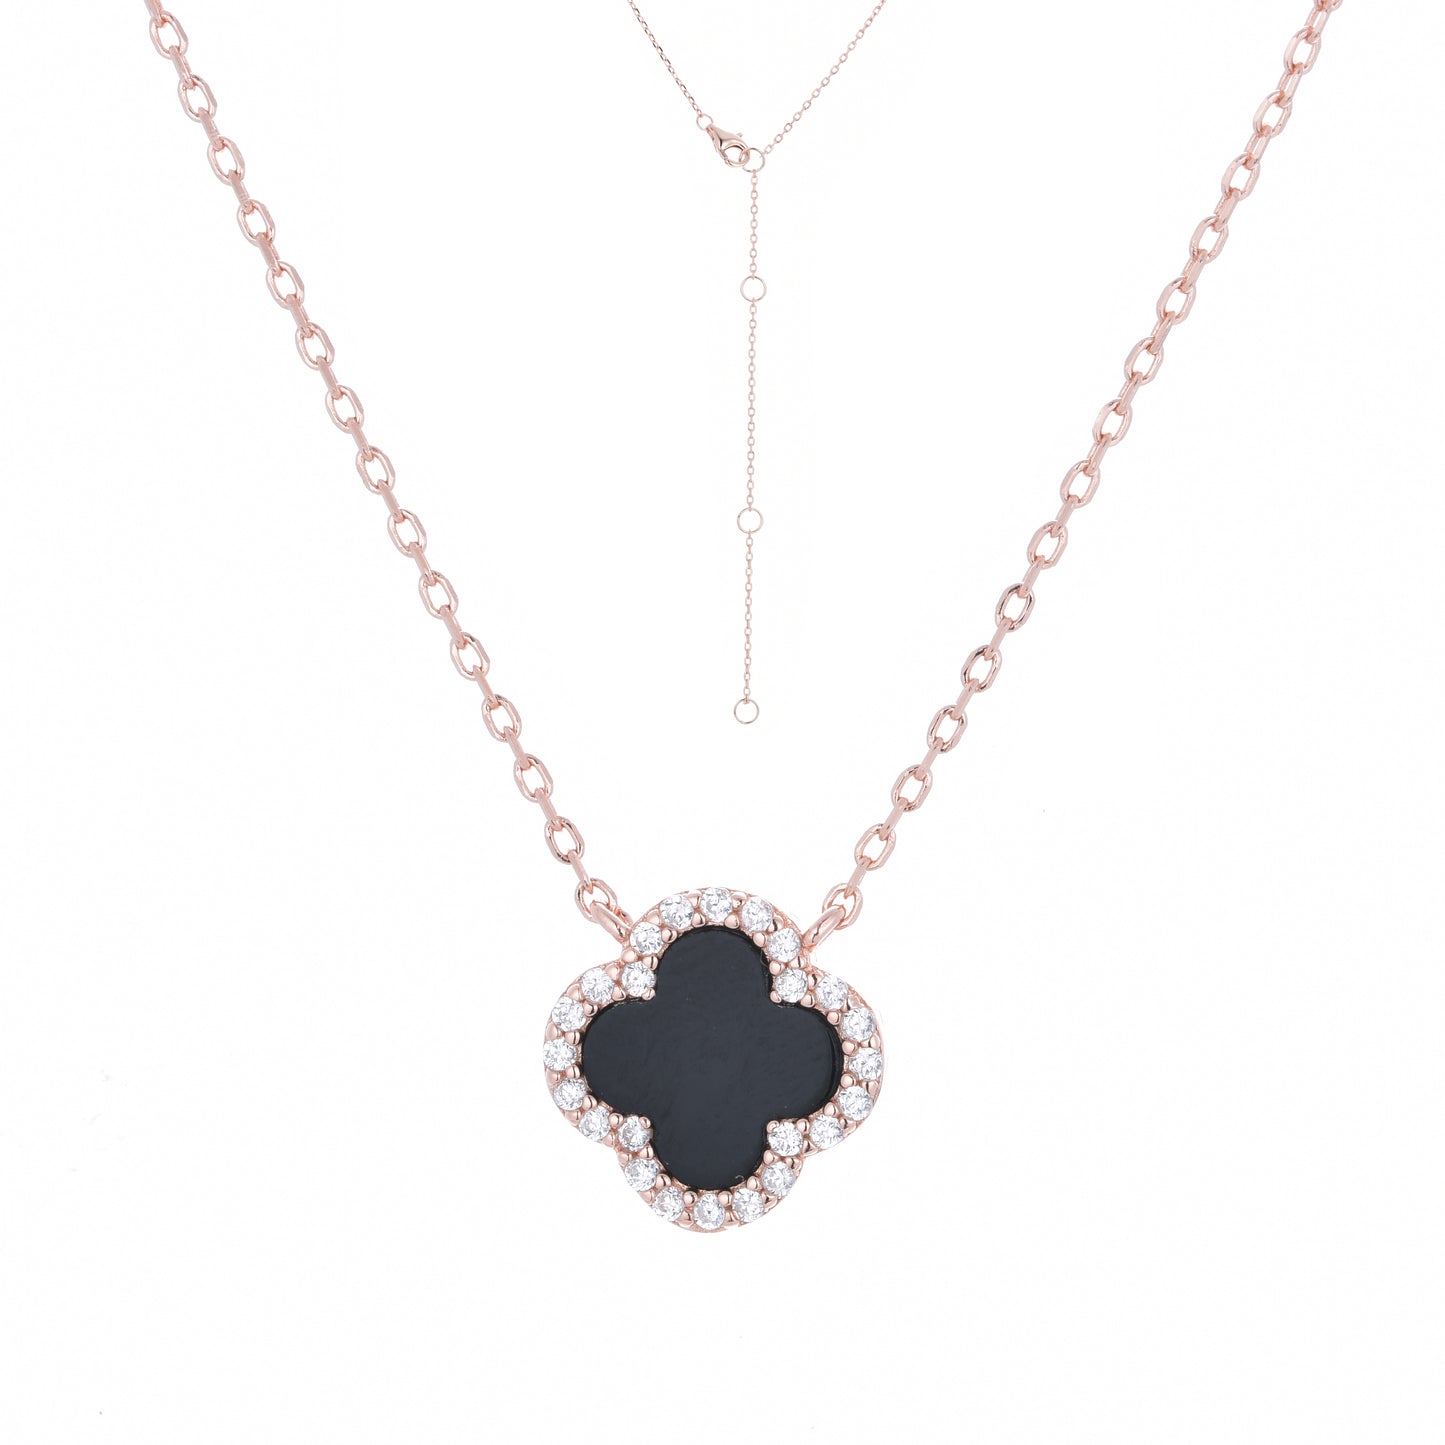 NG-5/R/O - Chain Necklace with Onyx Clover Charm